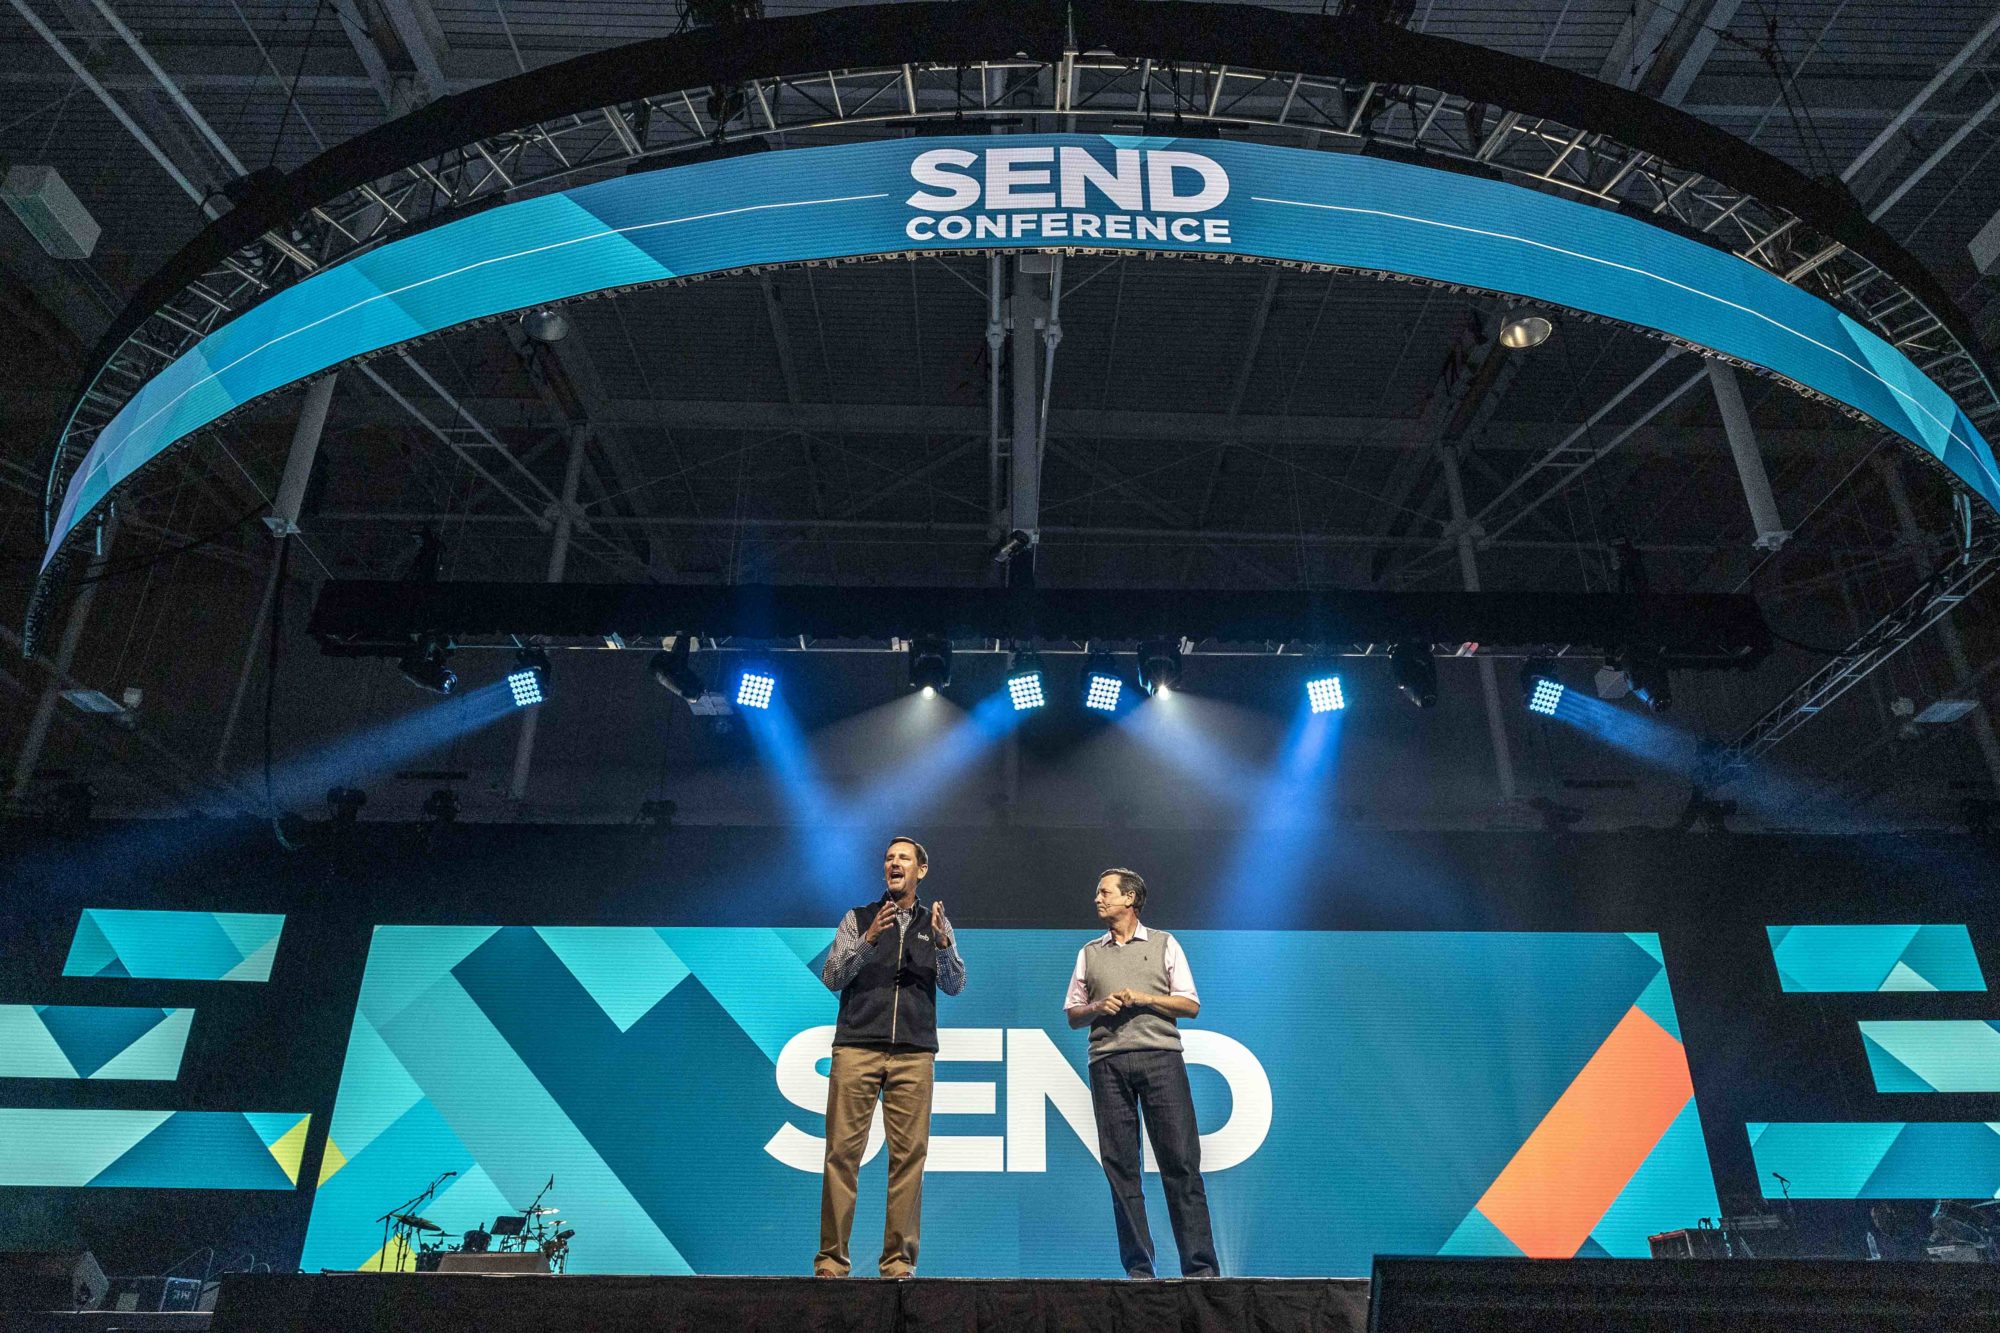 IMB President Paul Chitwood and NAMB President Kevin Ezell welcome participants to the Send Conference 2021. (IMB photo)